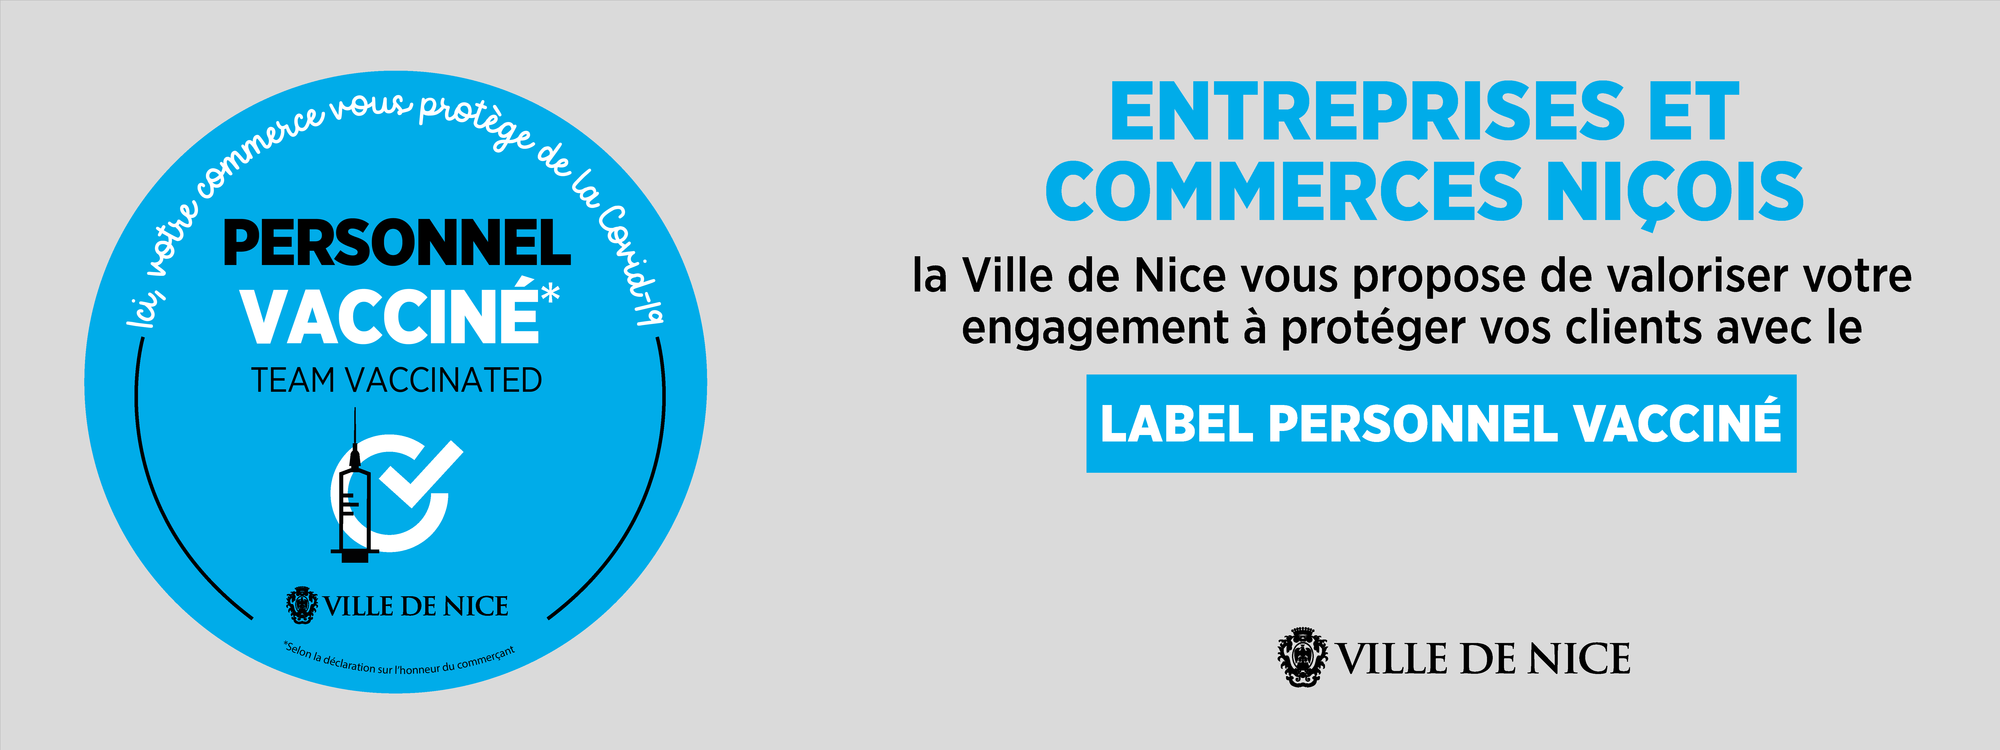 Label personnel vaccine%cc%81 2000x750px home nicecommerces